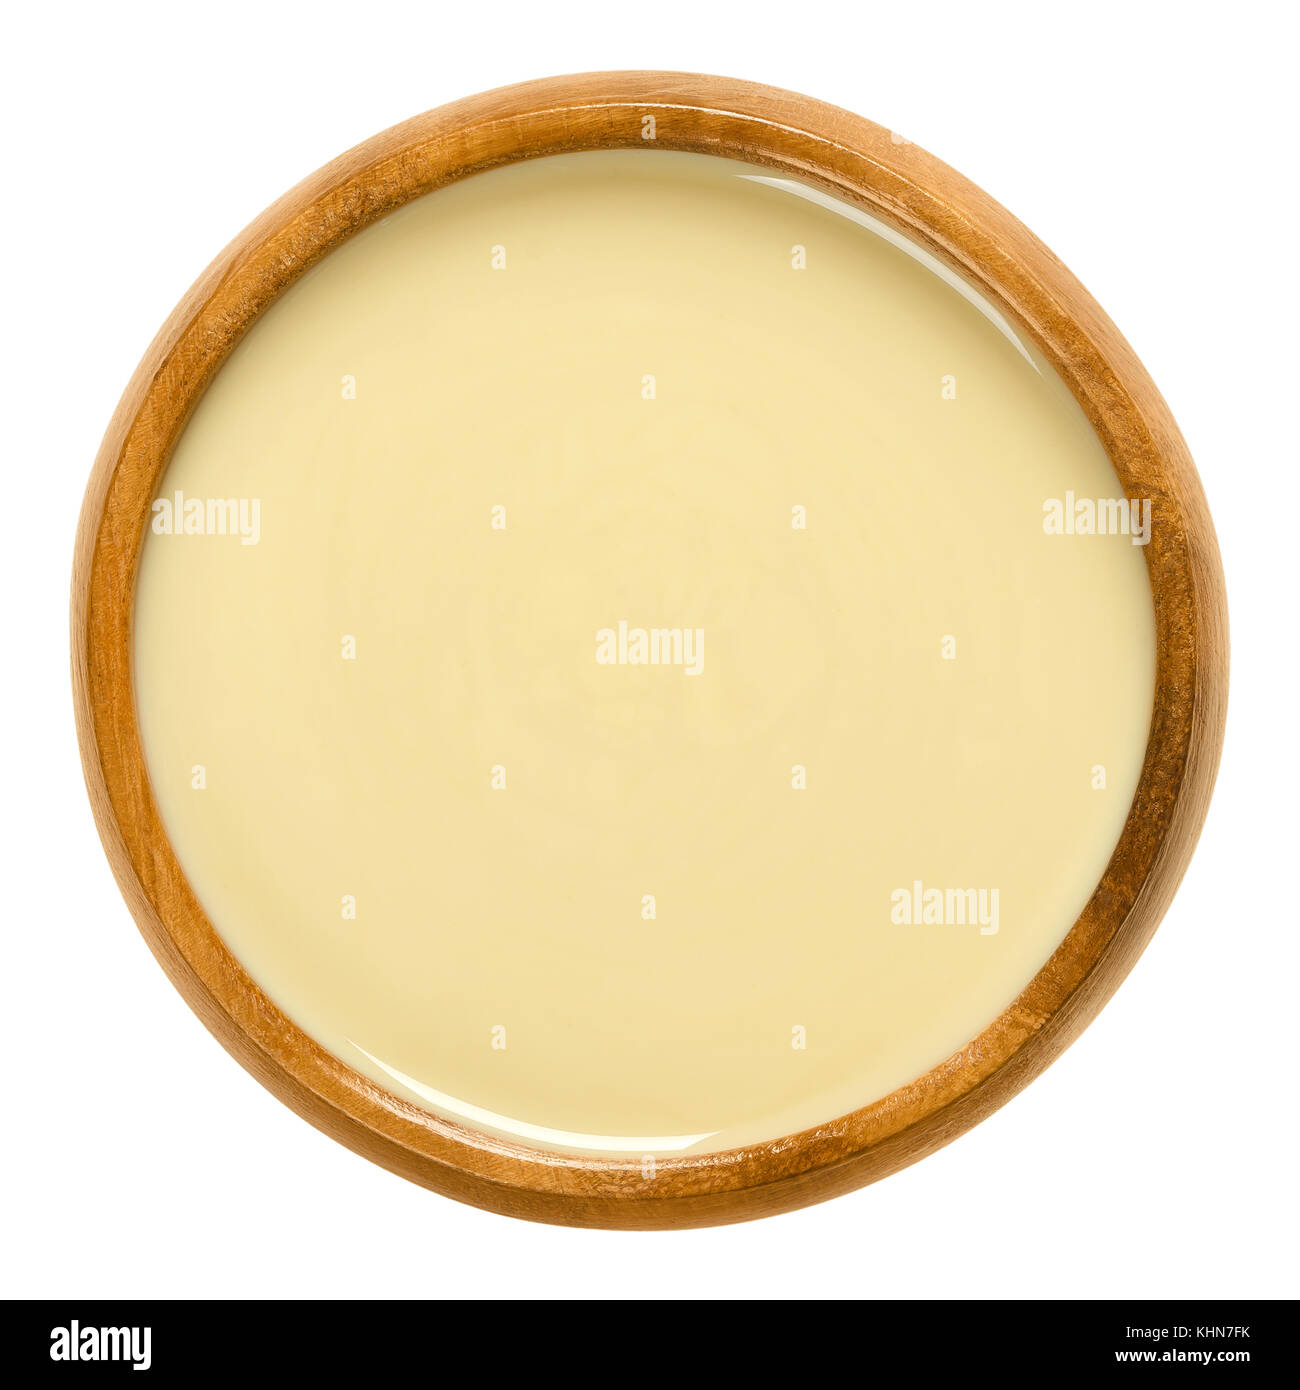 White almond butter in wooden bowl. Smooth food paste made of shelled blanched almonds. Fine puree of the nuts of Prunus dulcis. Isolated macro food p Stock Photo